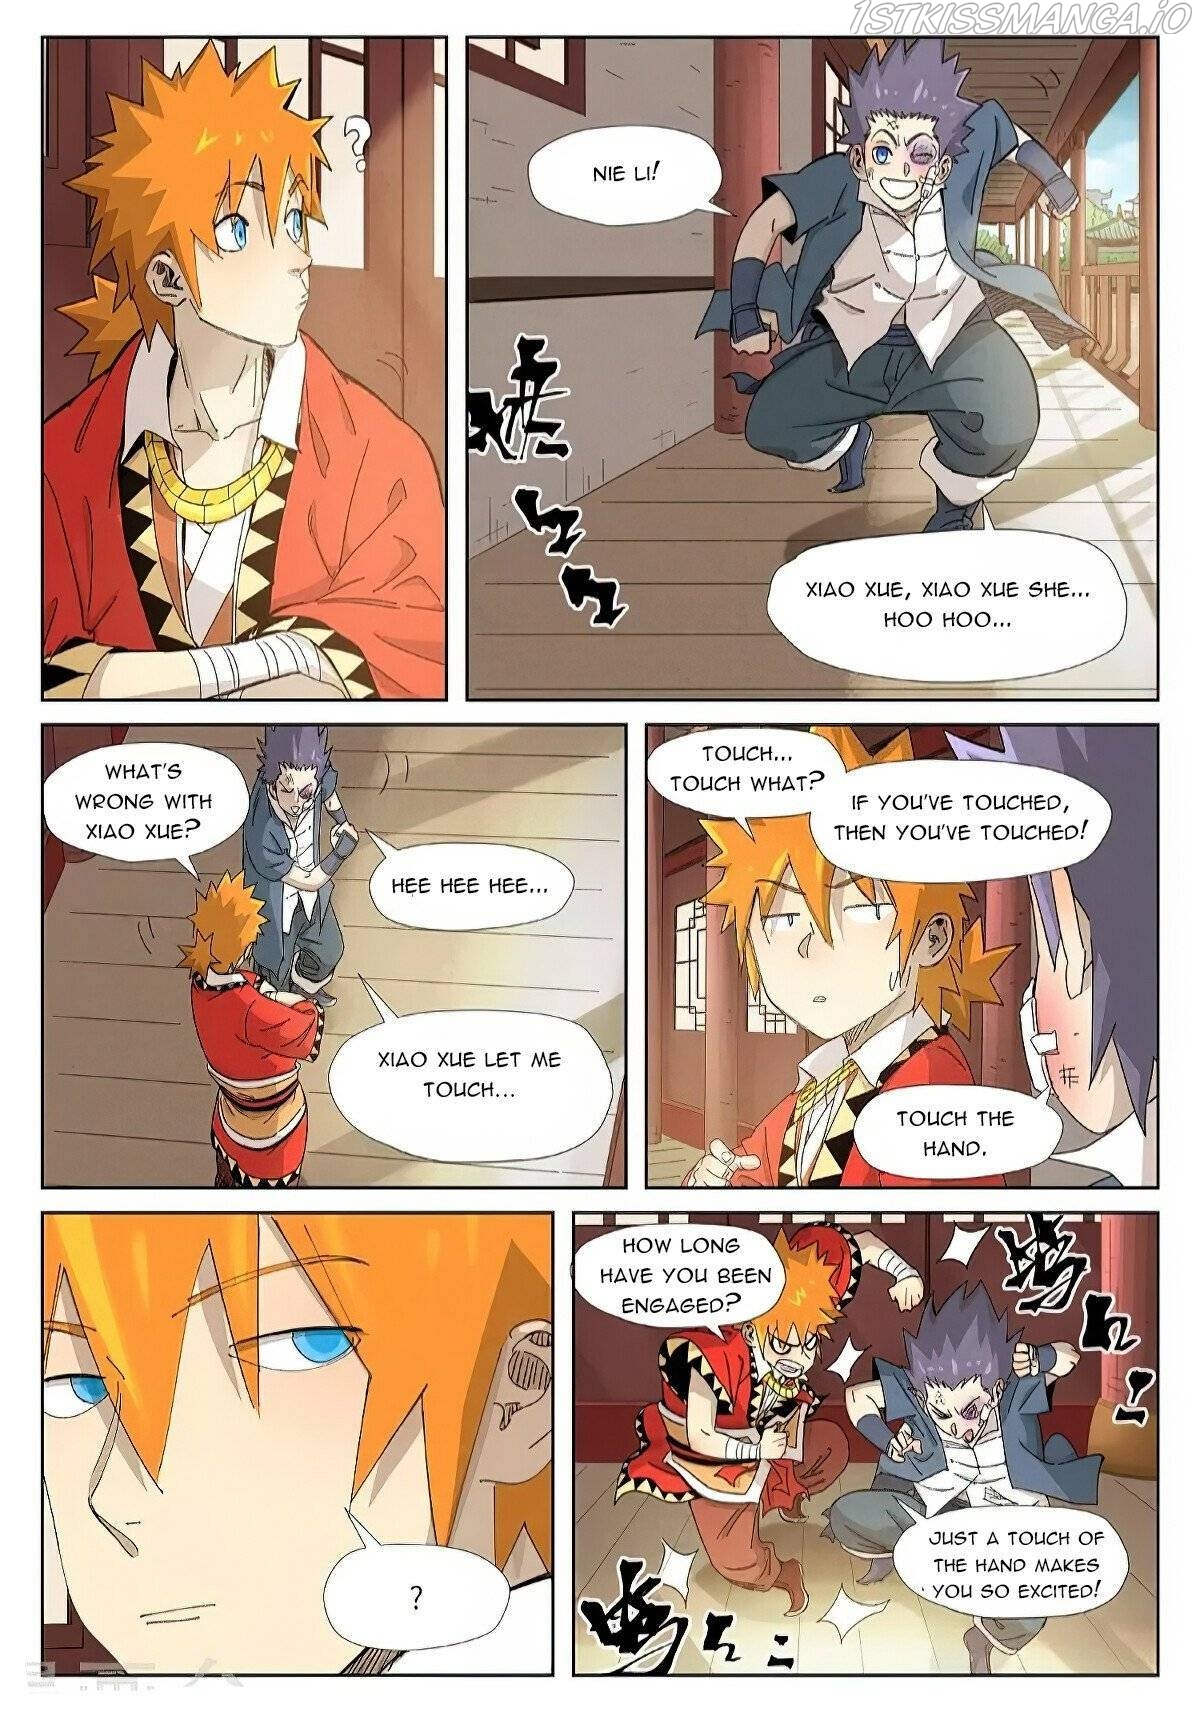 Tales of Demons and Gods Manhua Chapter 344.5 - Page 1